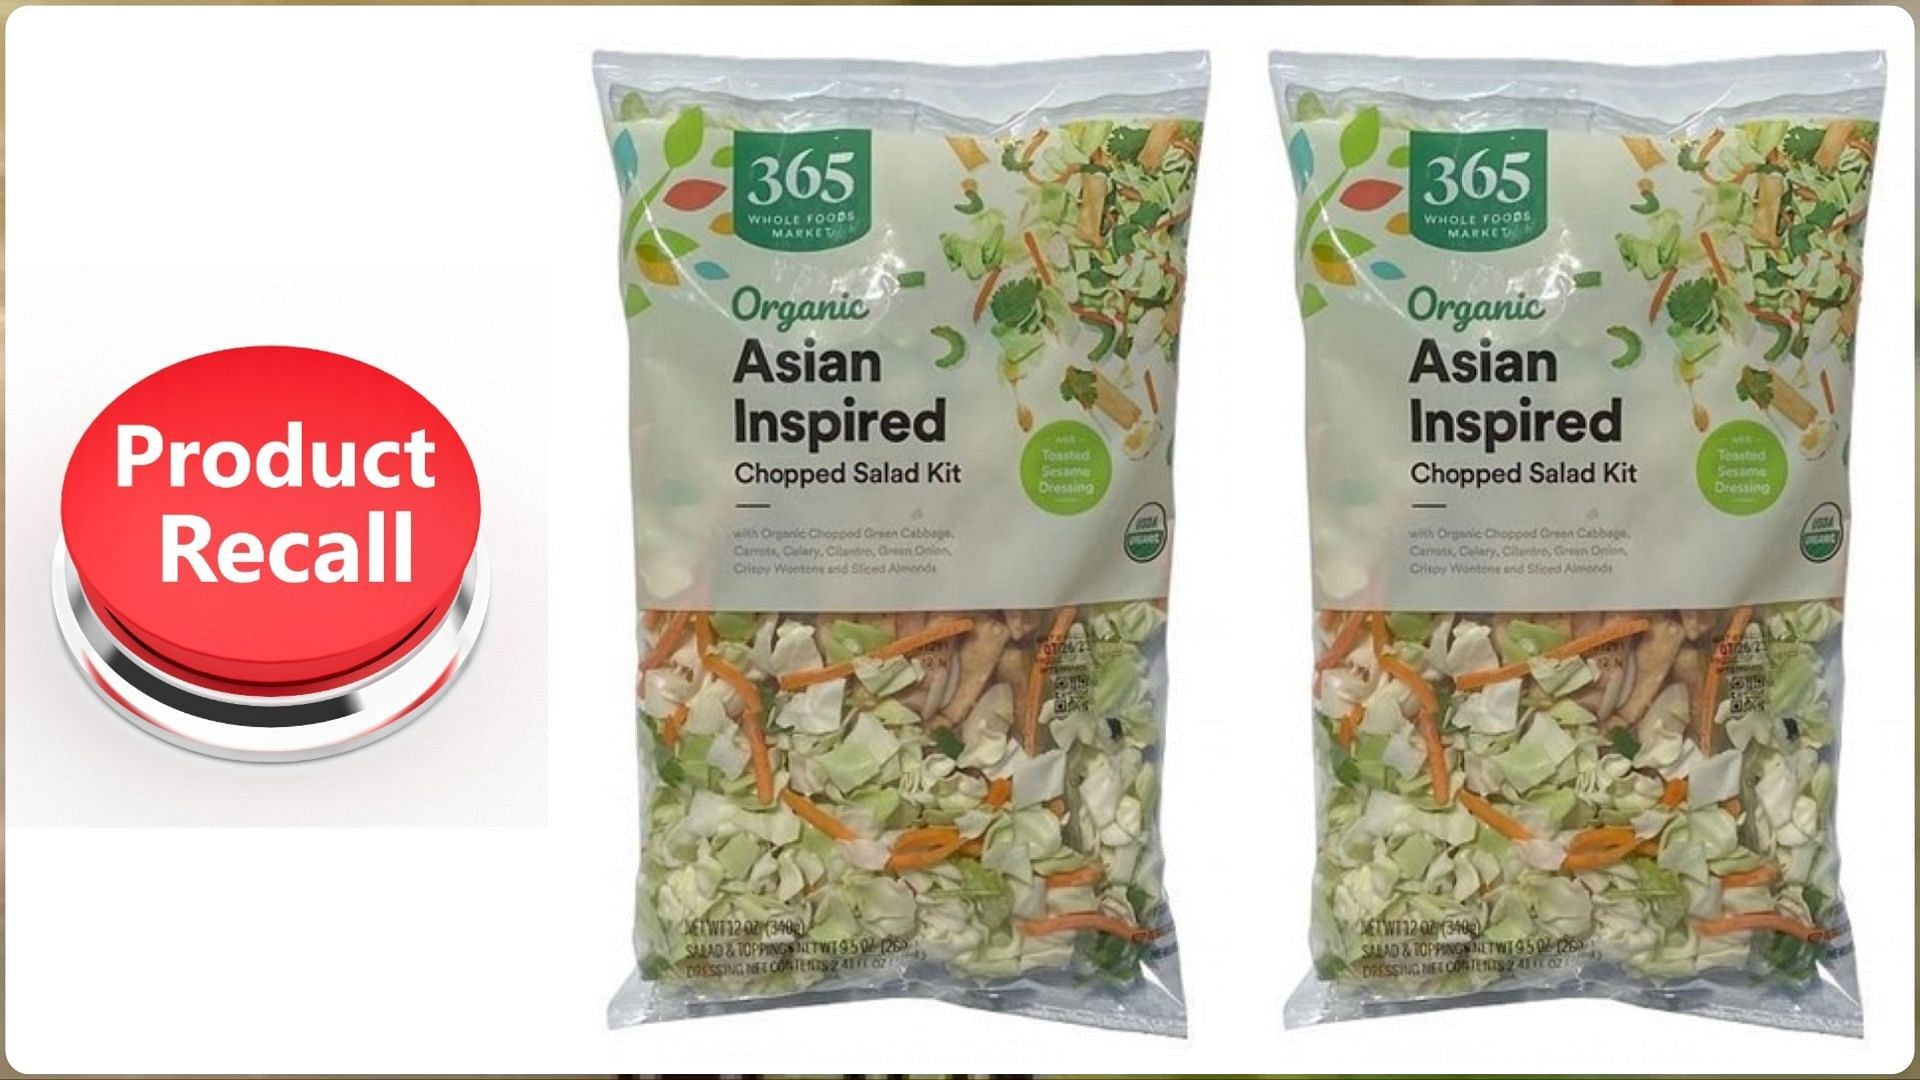 Ready-to-eat Salads From Whole Foods Are Being Recalled Due